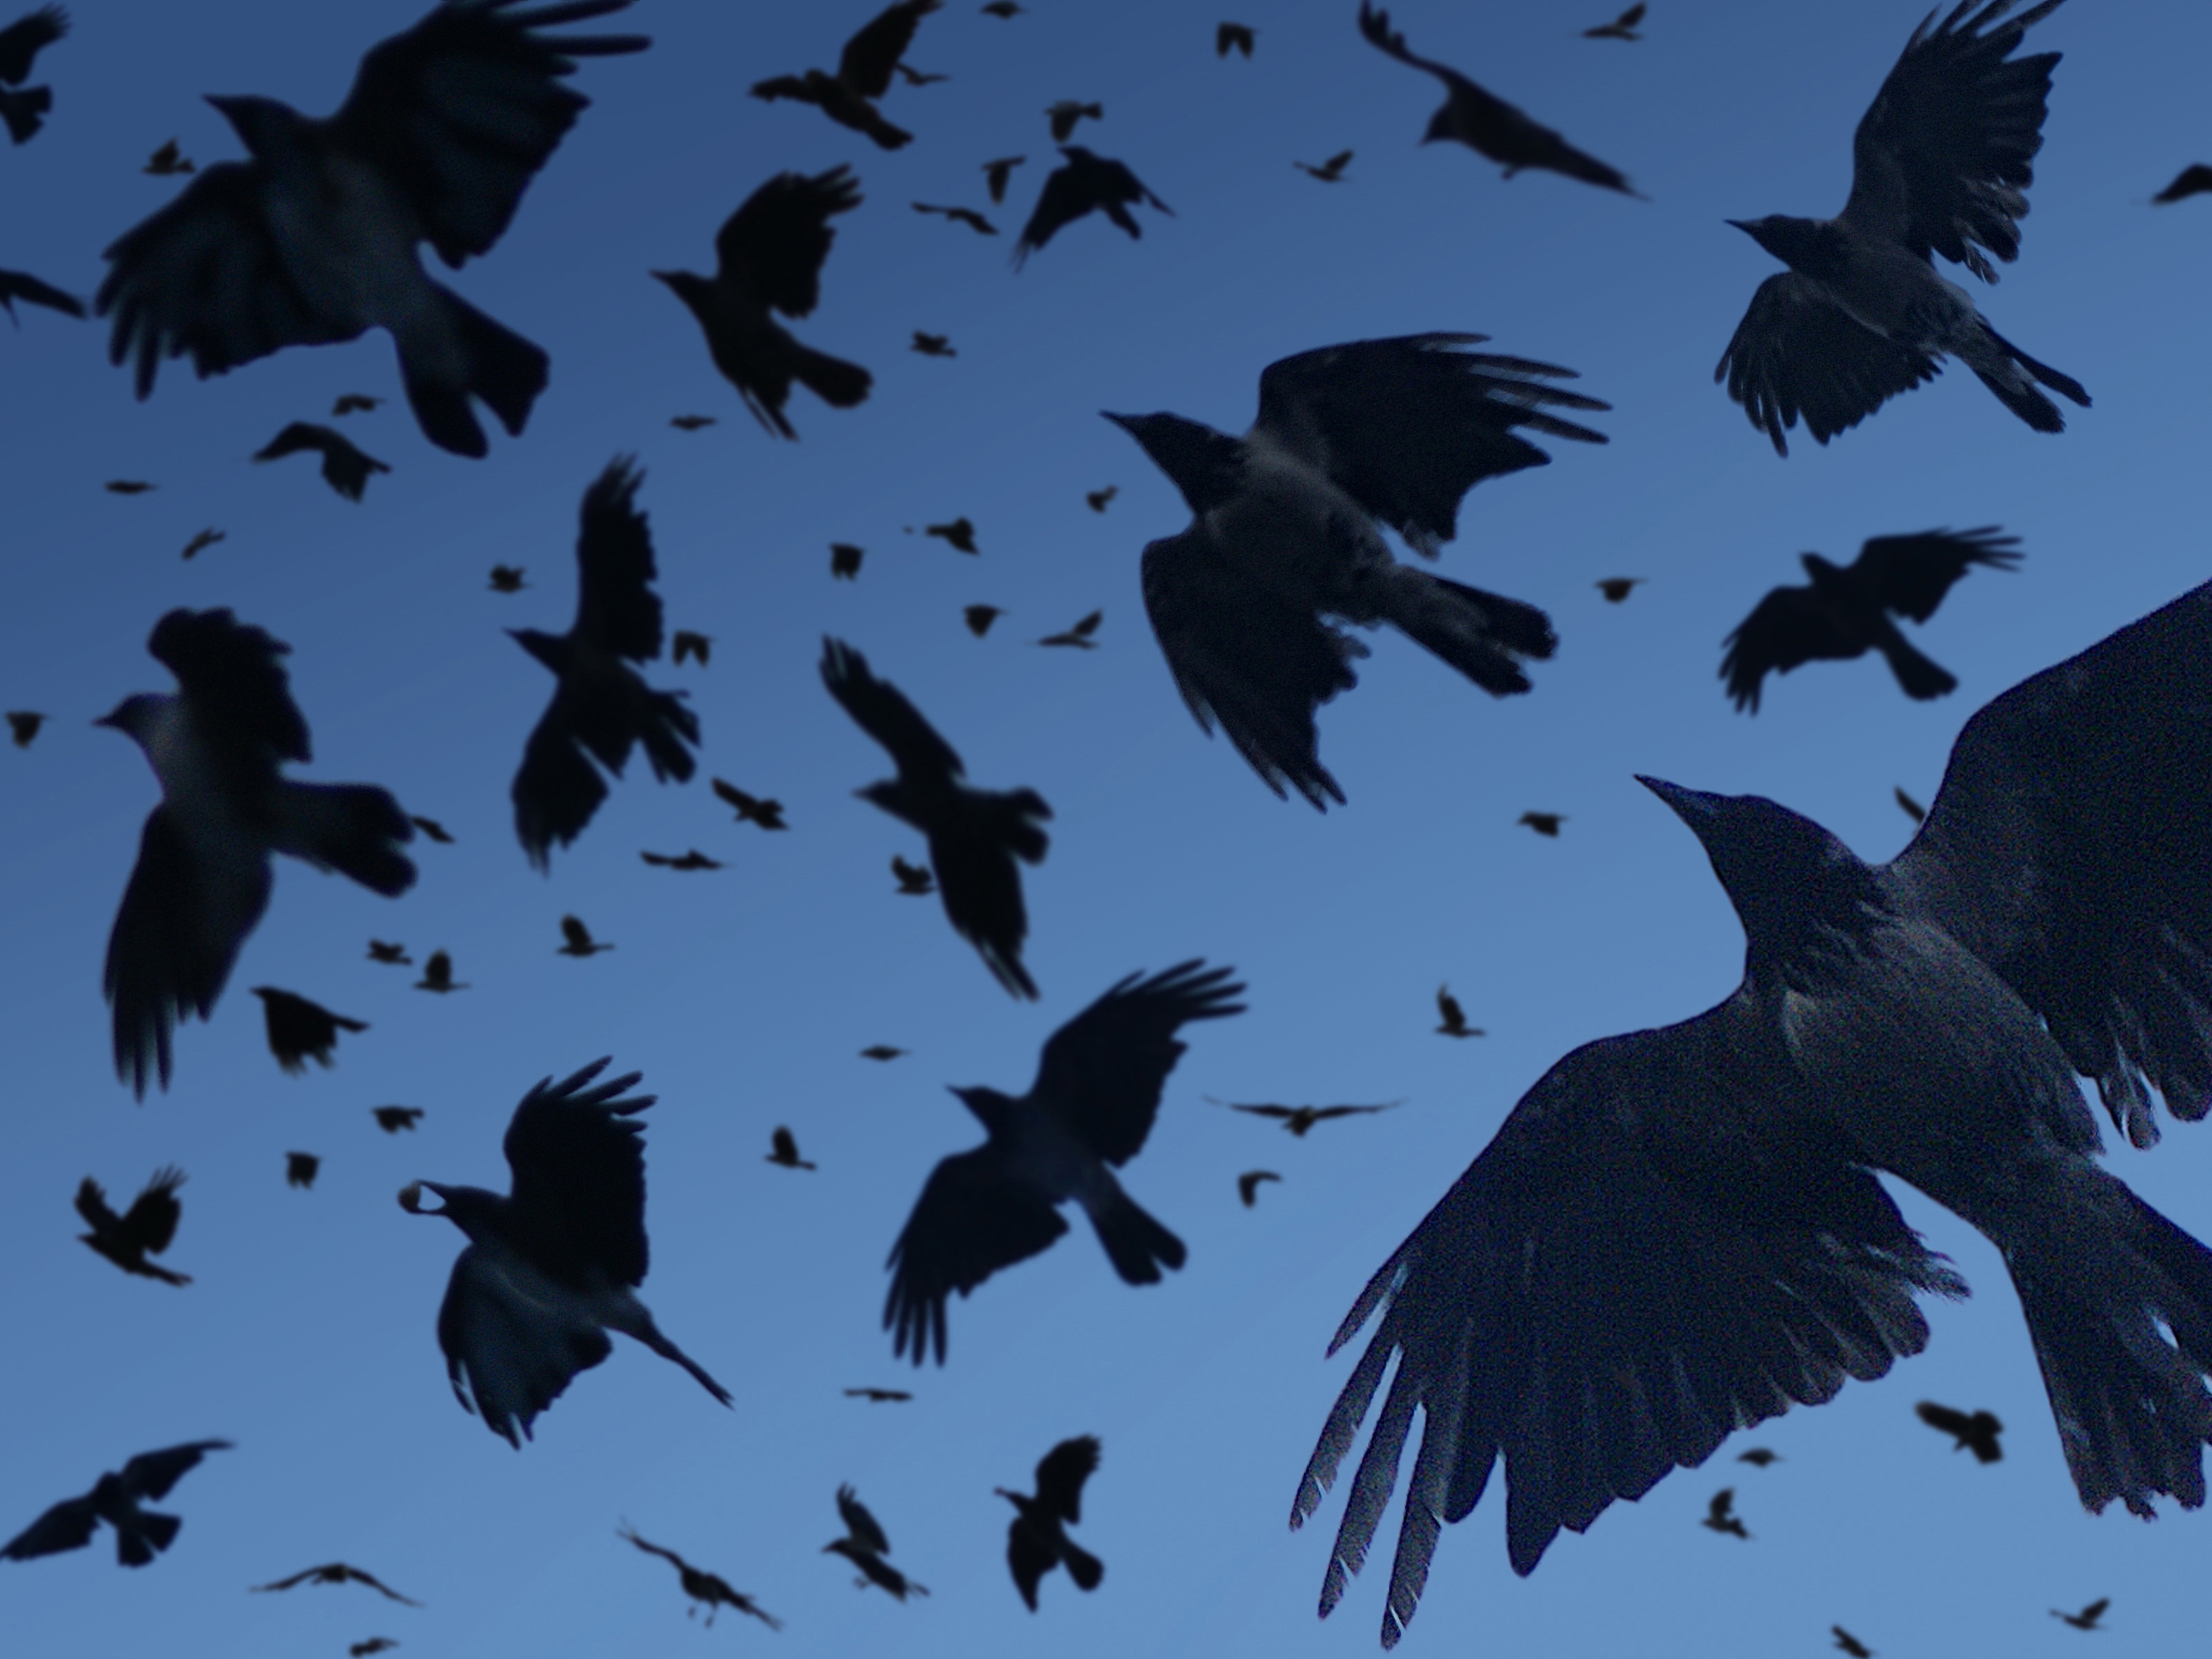 A murder of crows in flight. | Source: Getty Images